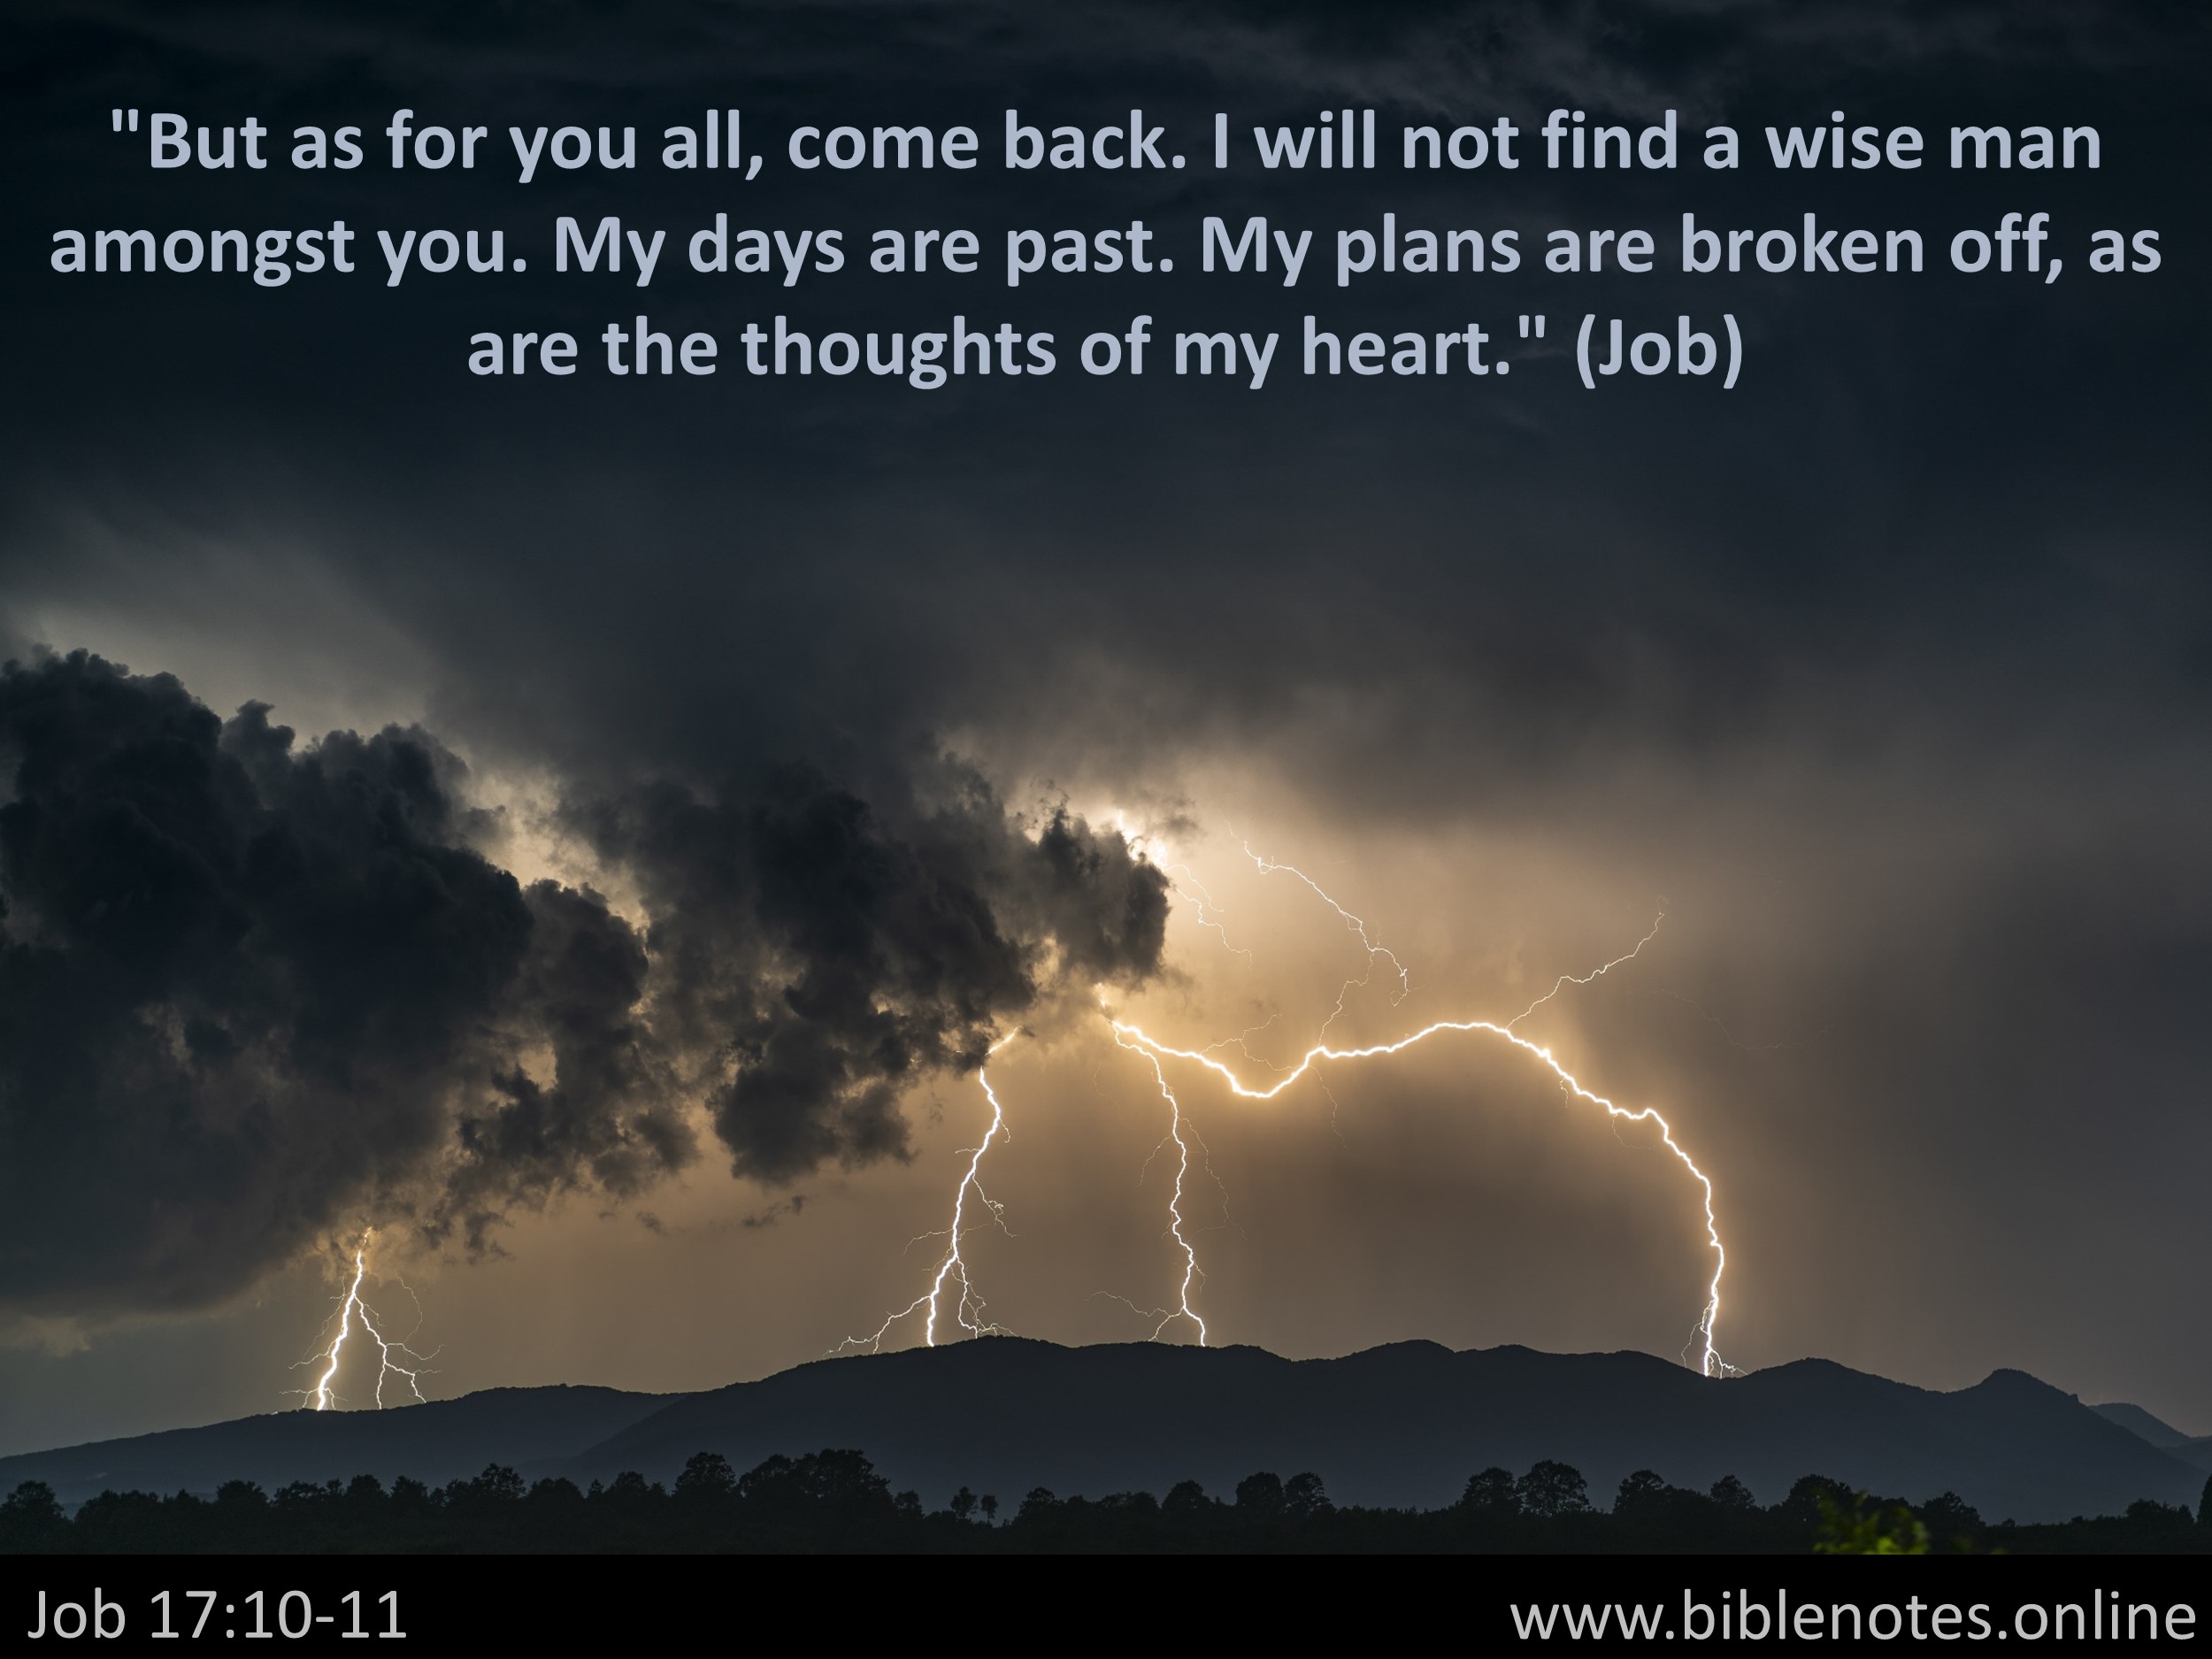 Bible Verse from Job Chapter 17